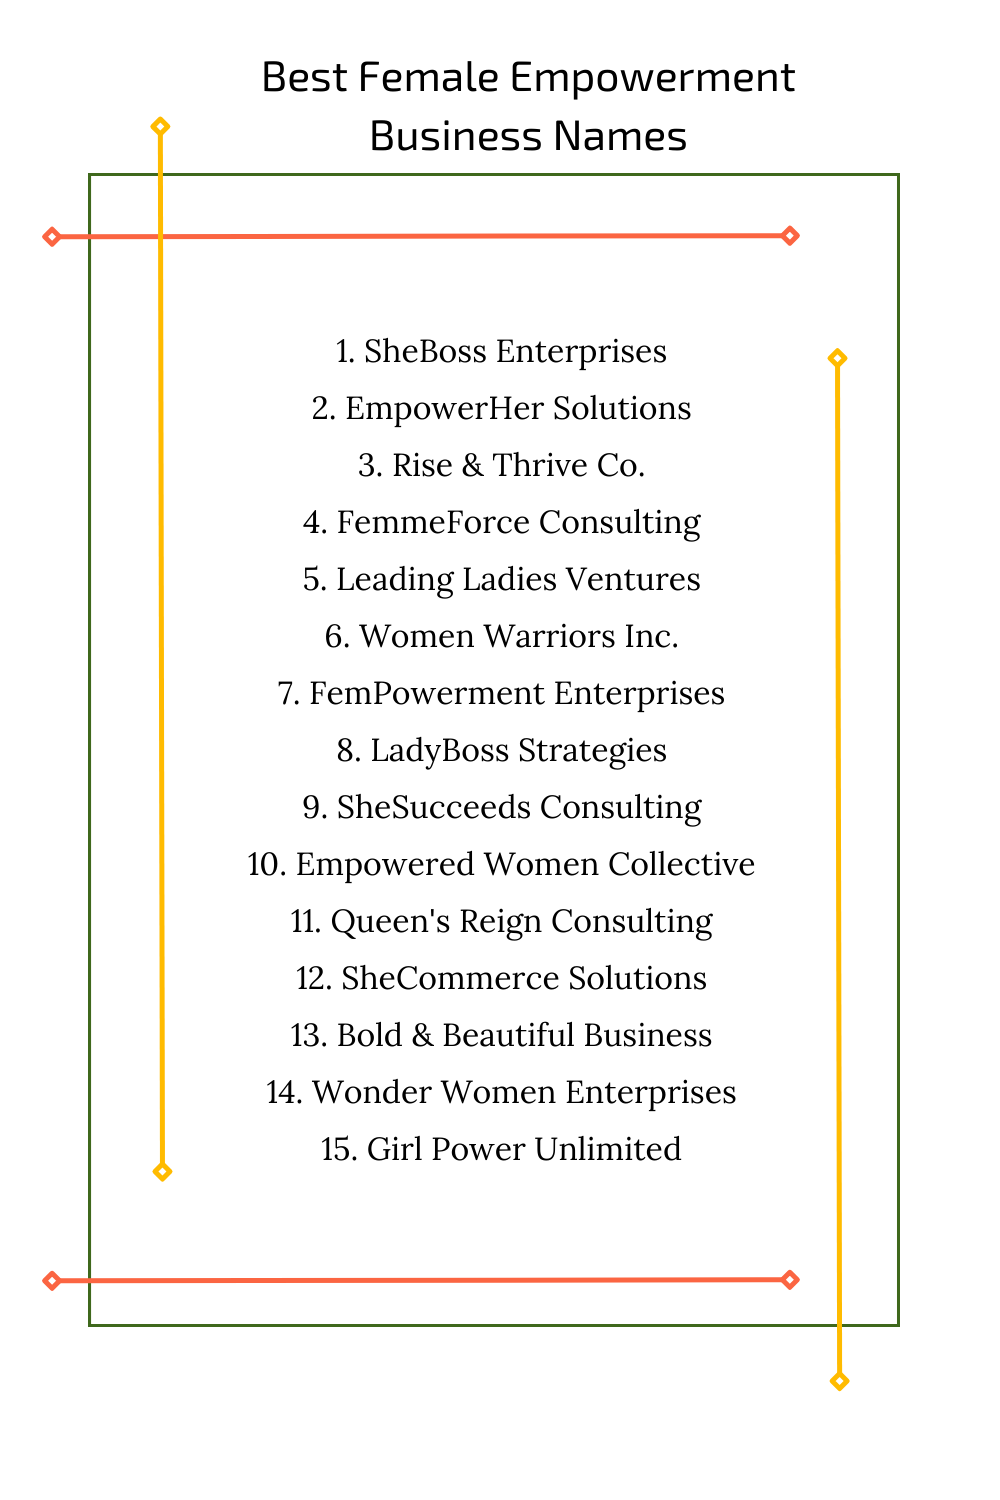 Best Female Empowerment Business Names 